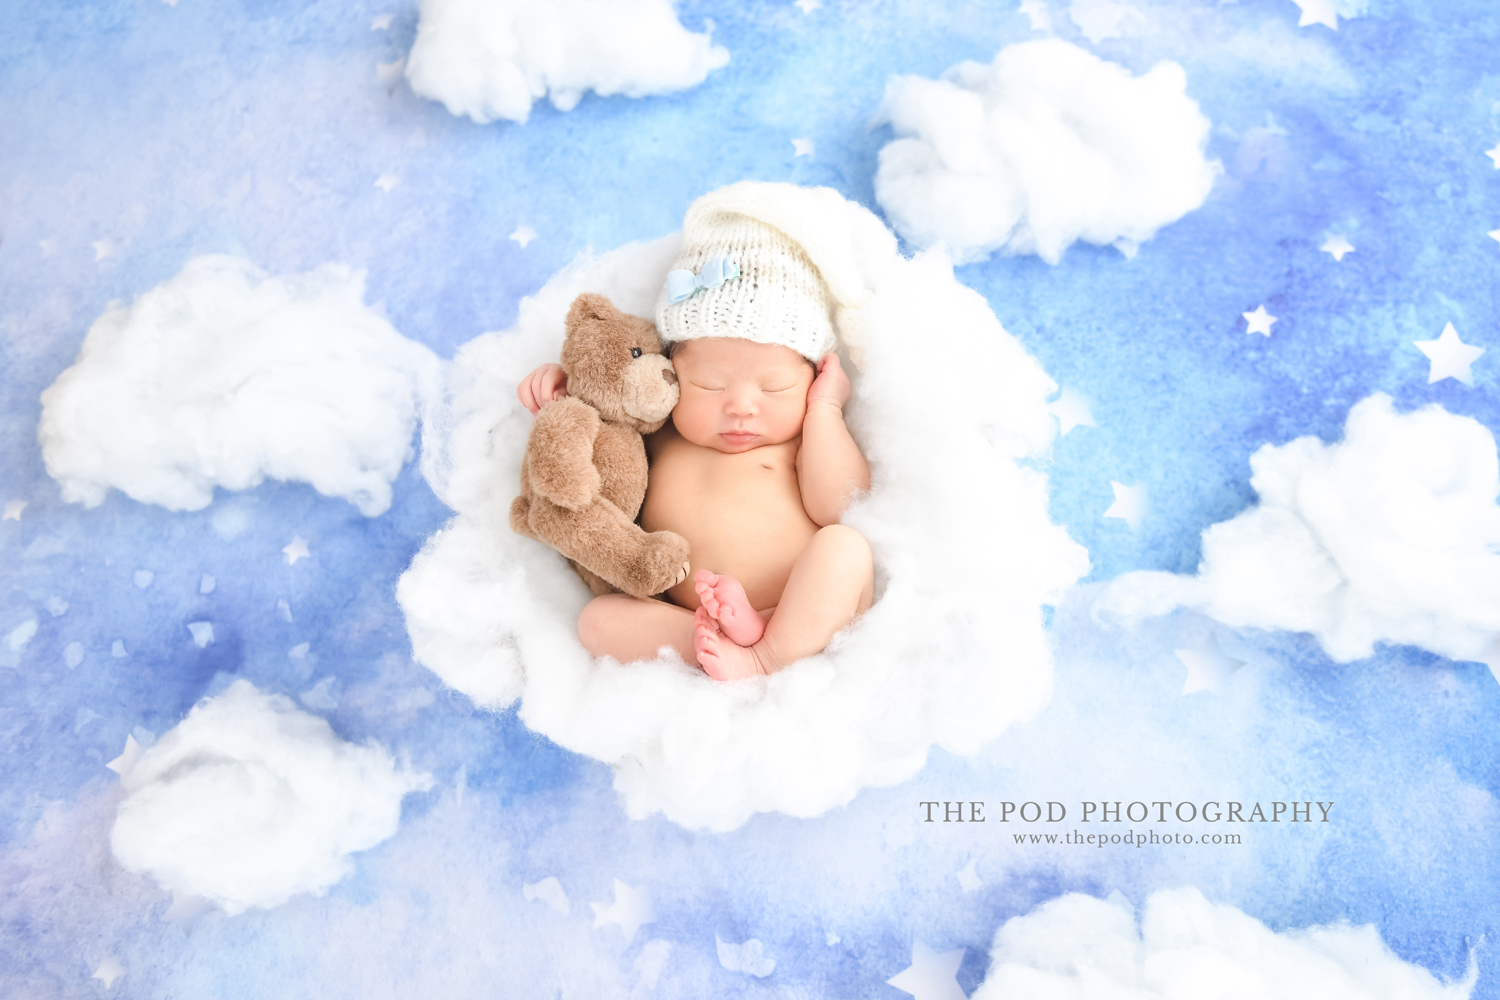 Newborn Photographer Downtown Los Angeles - Creative Baby Pictures - Los  Angeles based photo studio, The Pod Photography, specializing in maternity,  newborn, baby, first birthday cake smash and family pictures.